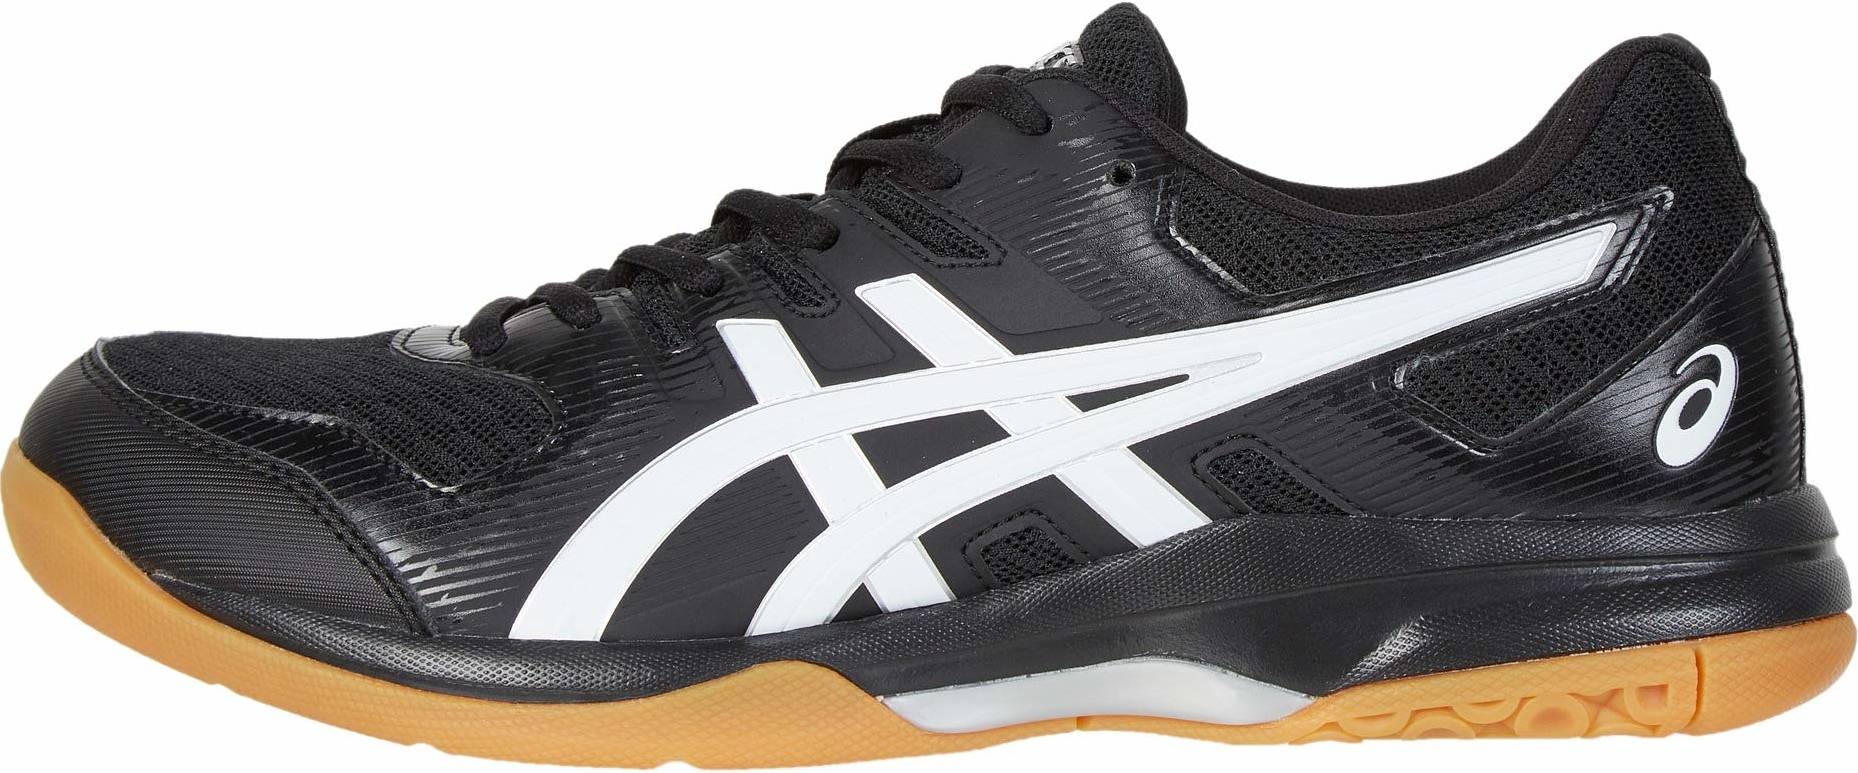 Save 33% on Volleyball Shoes (40 Models 